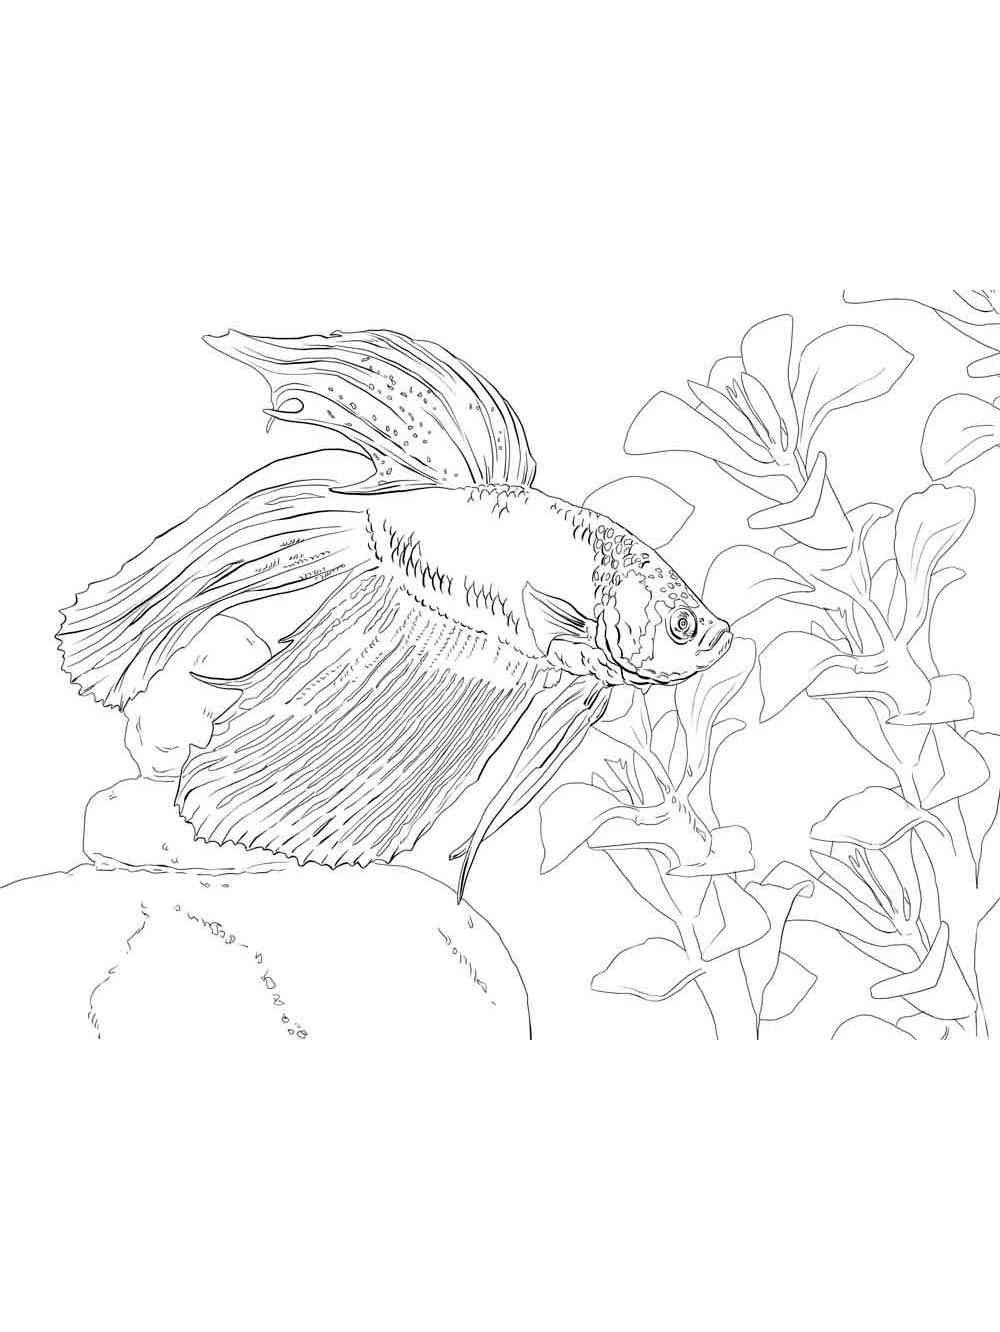 Betta Fish 11 coloring page